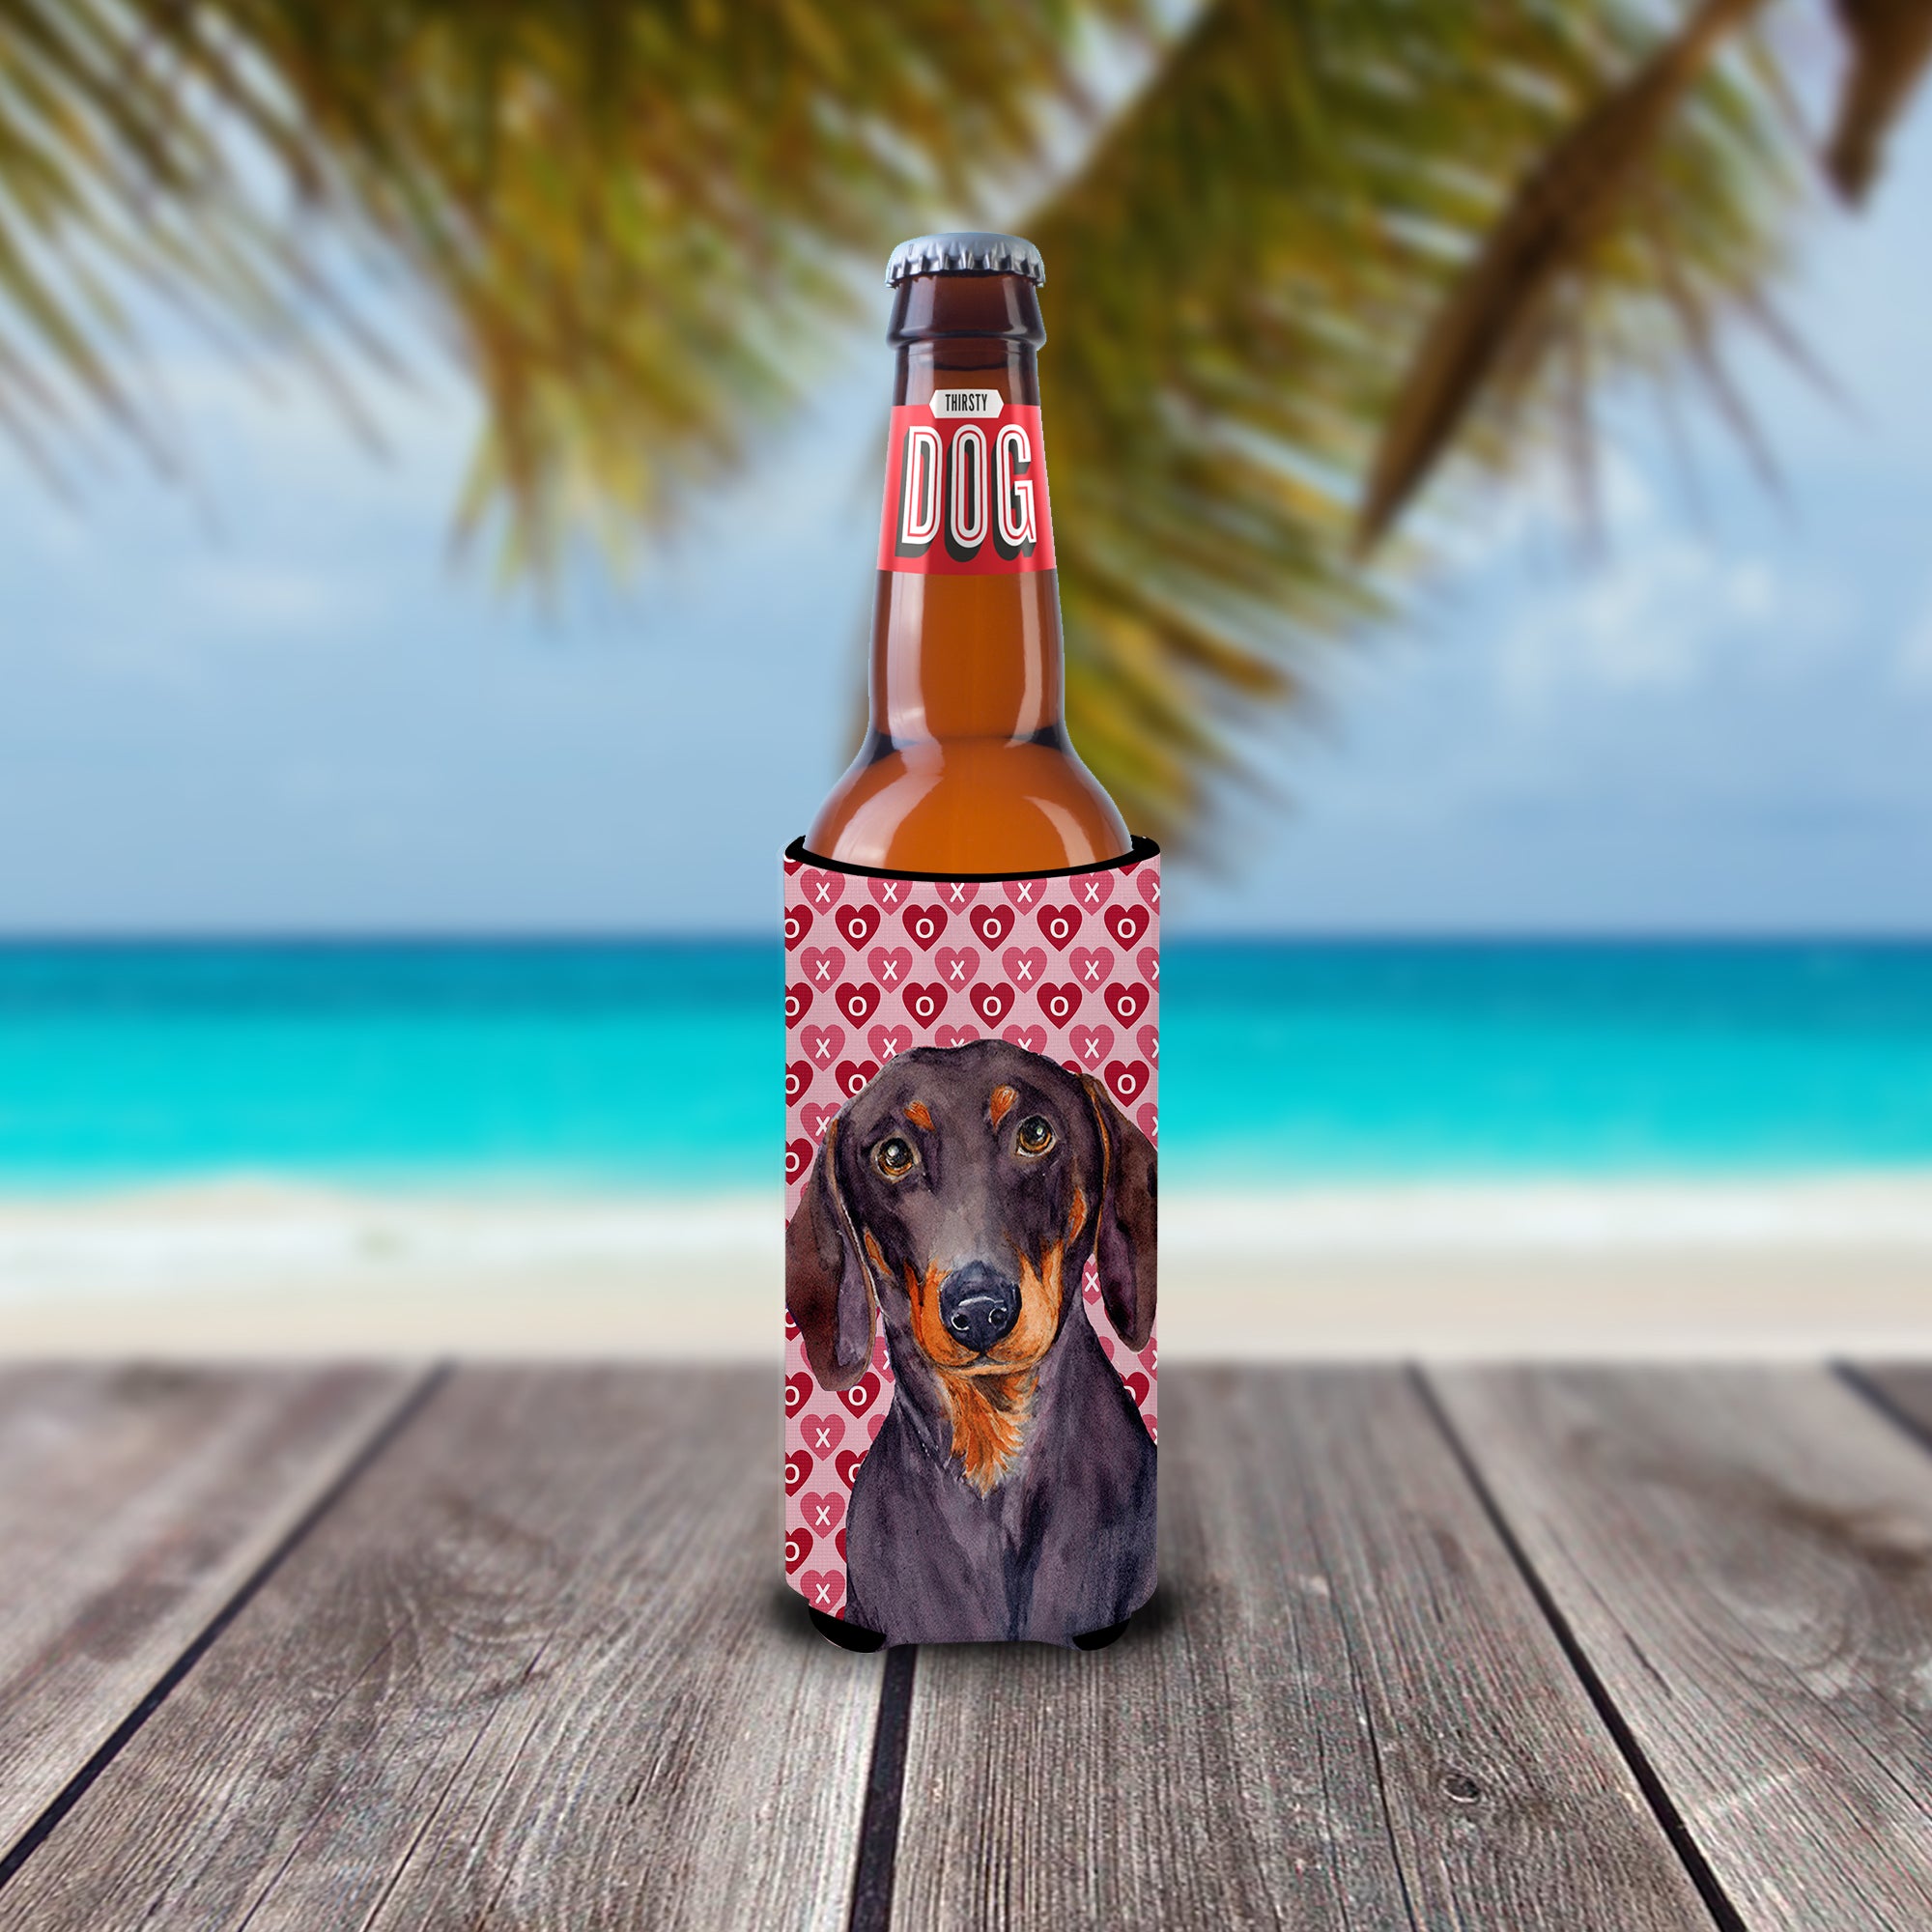 Dachshund Hearts Love and Valentine's Day Portrait Ultra Beverage Insulators for slim cans LH9133MUK.